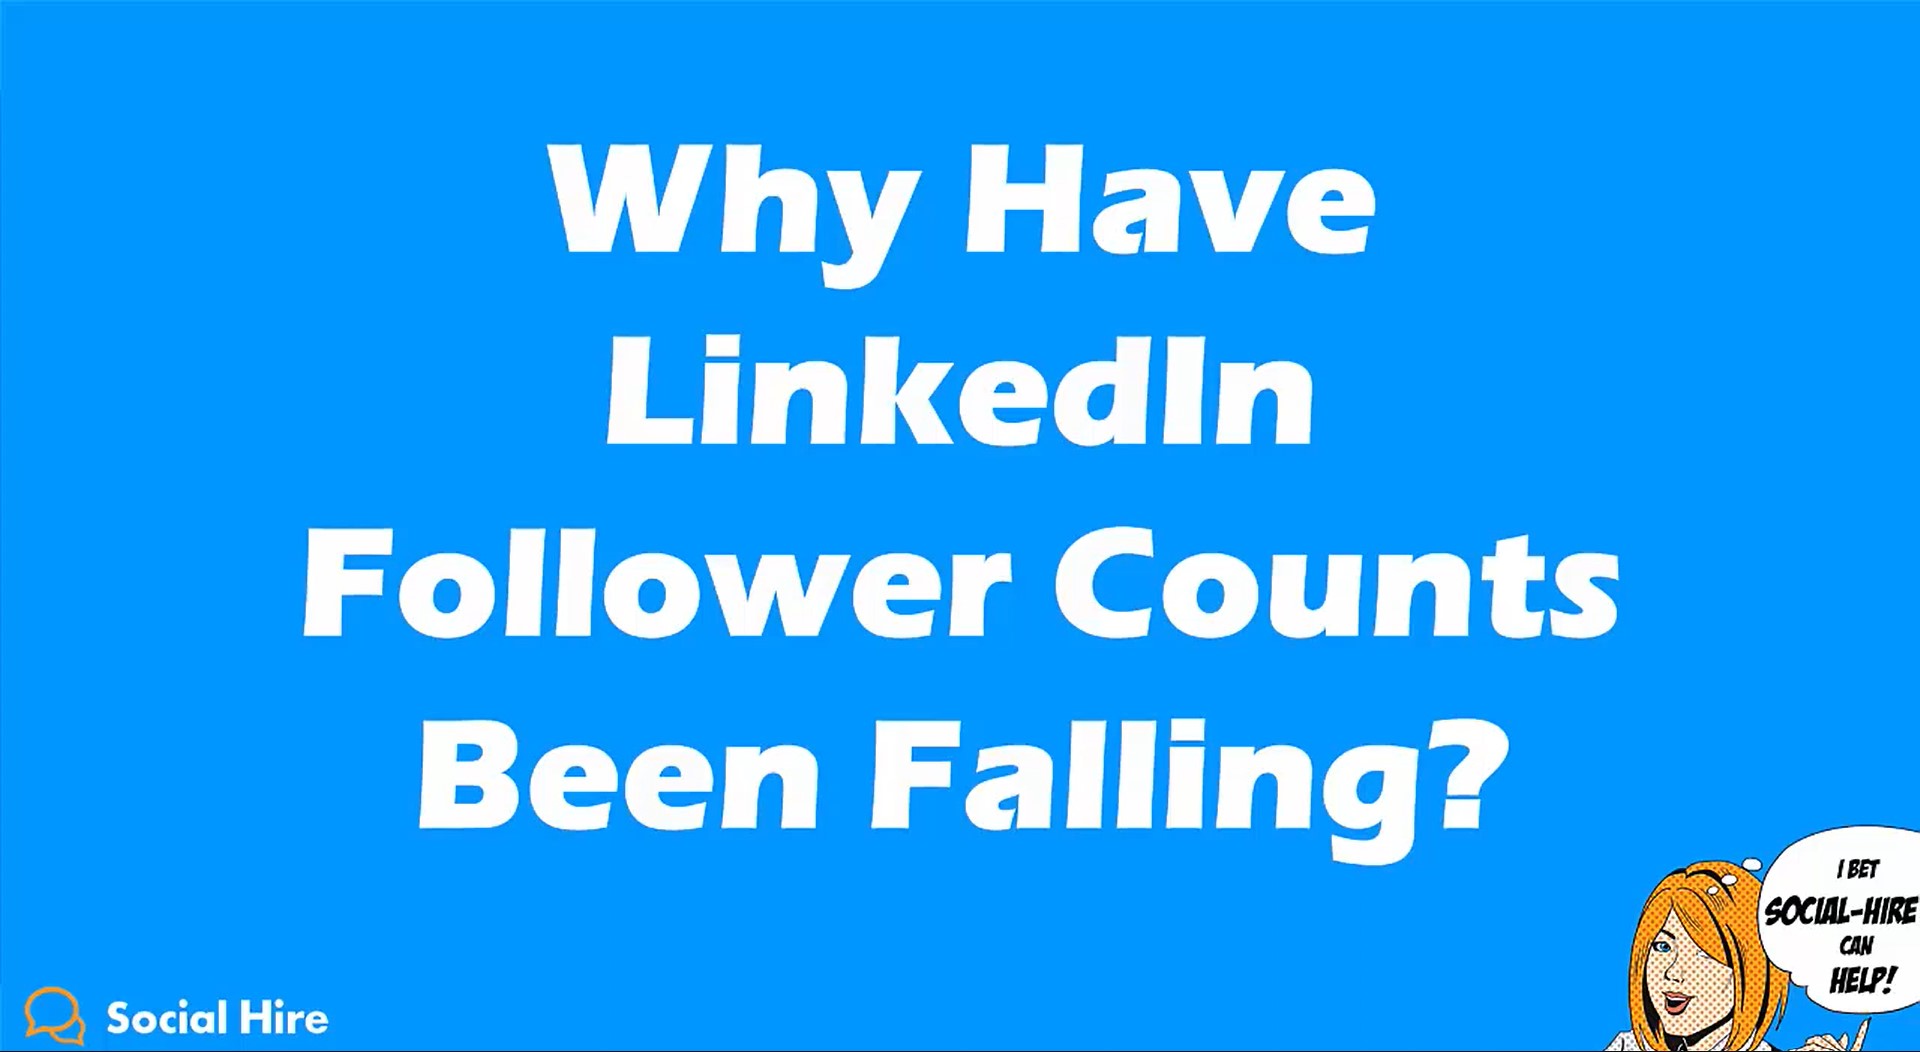 Social Hire 1: Why Have LinkedIn Follower Counts Been Falling?